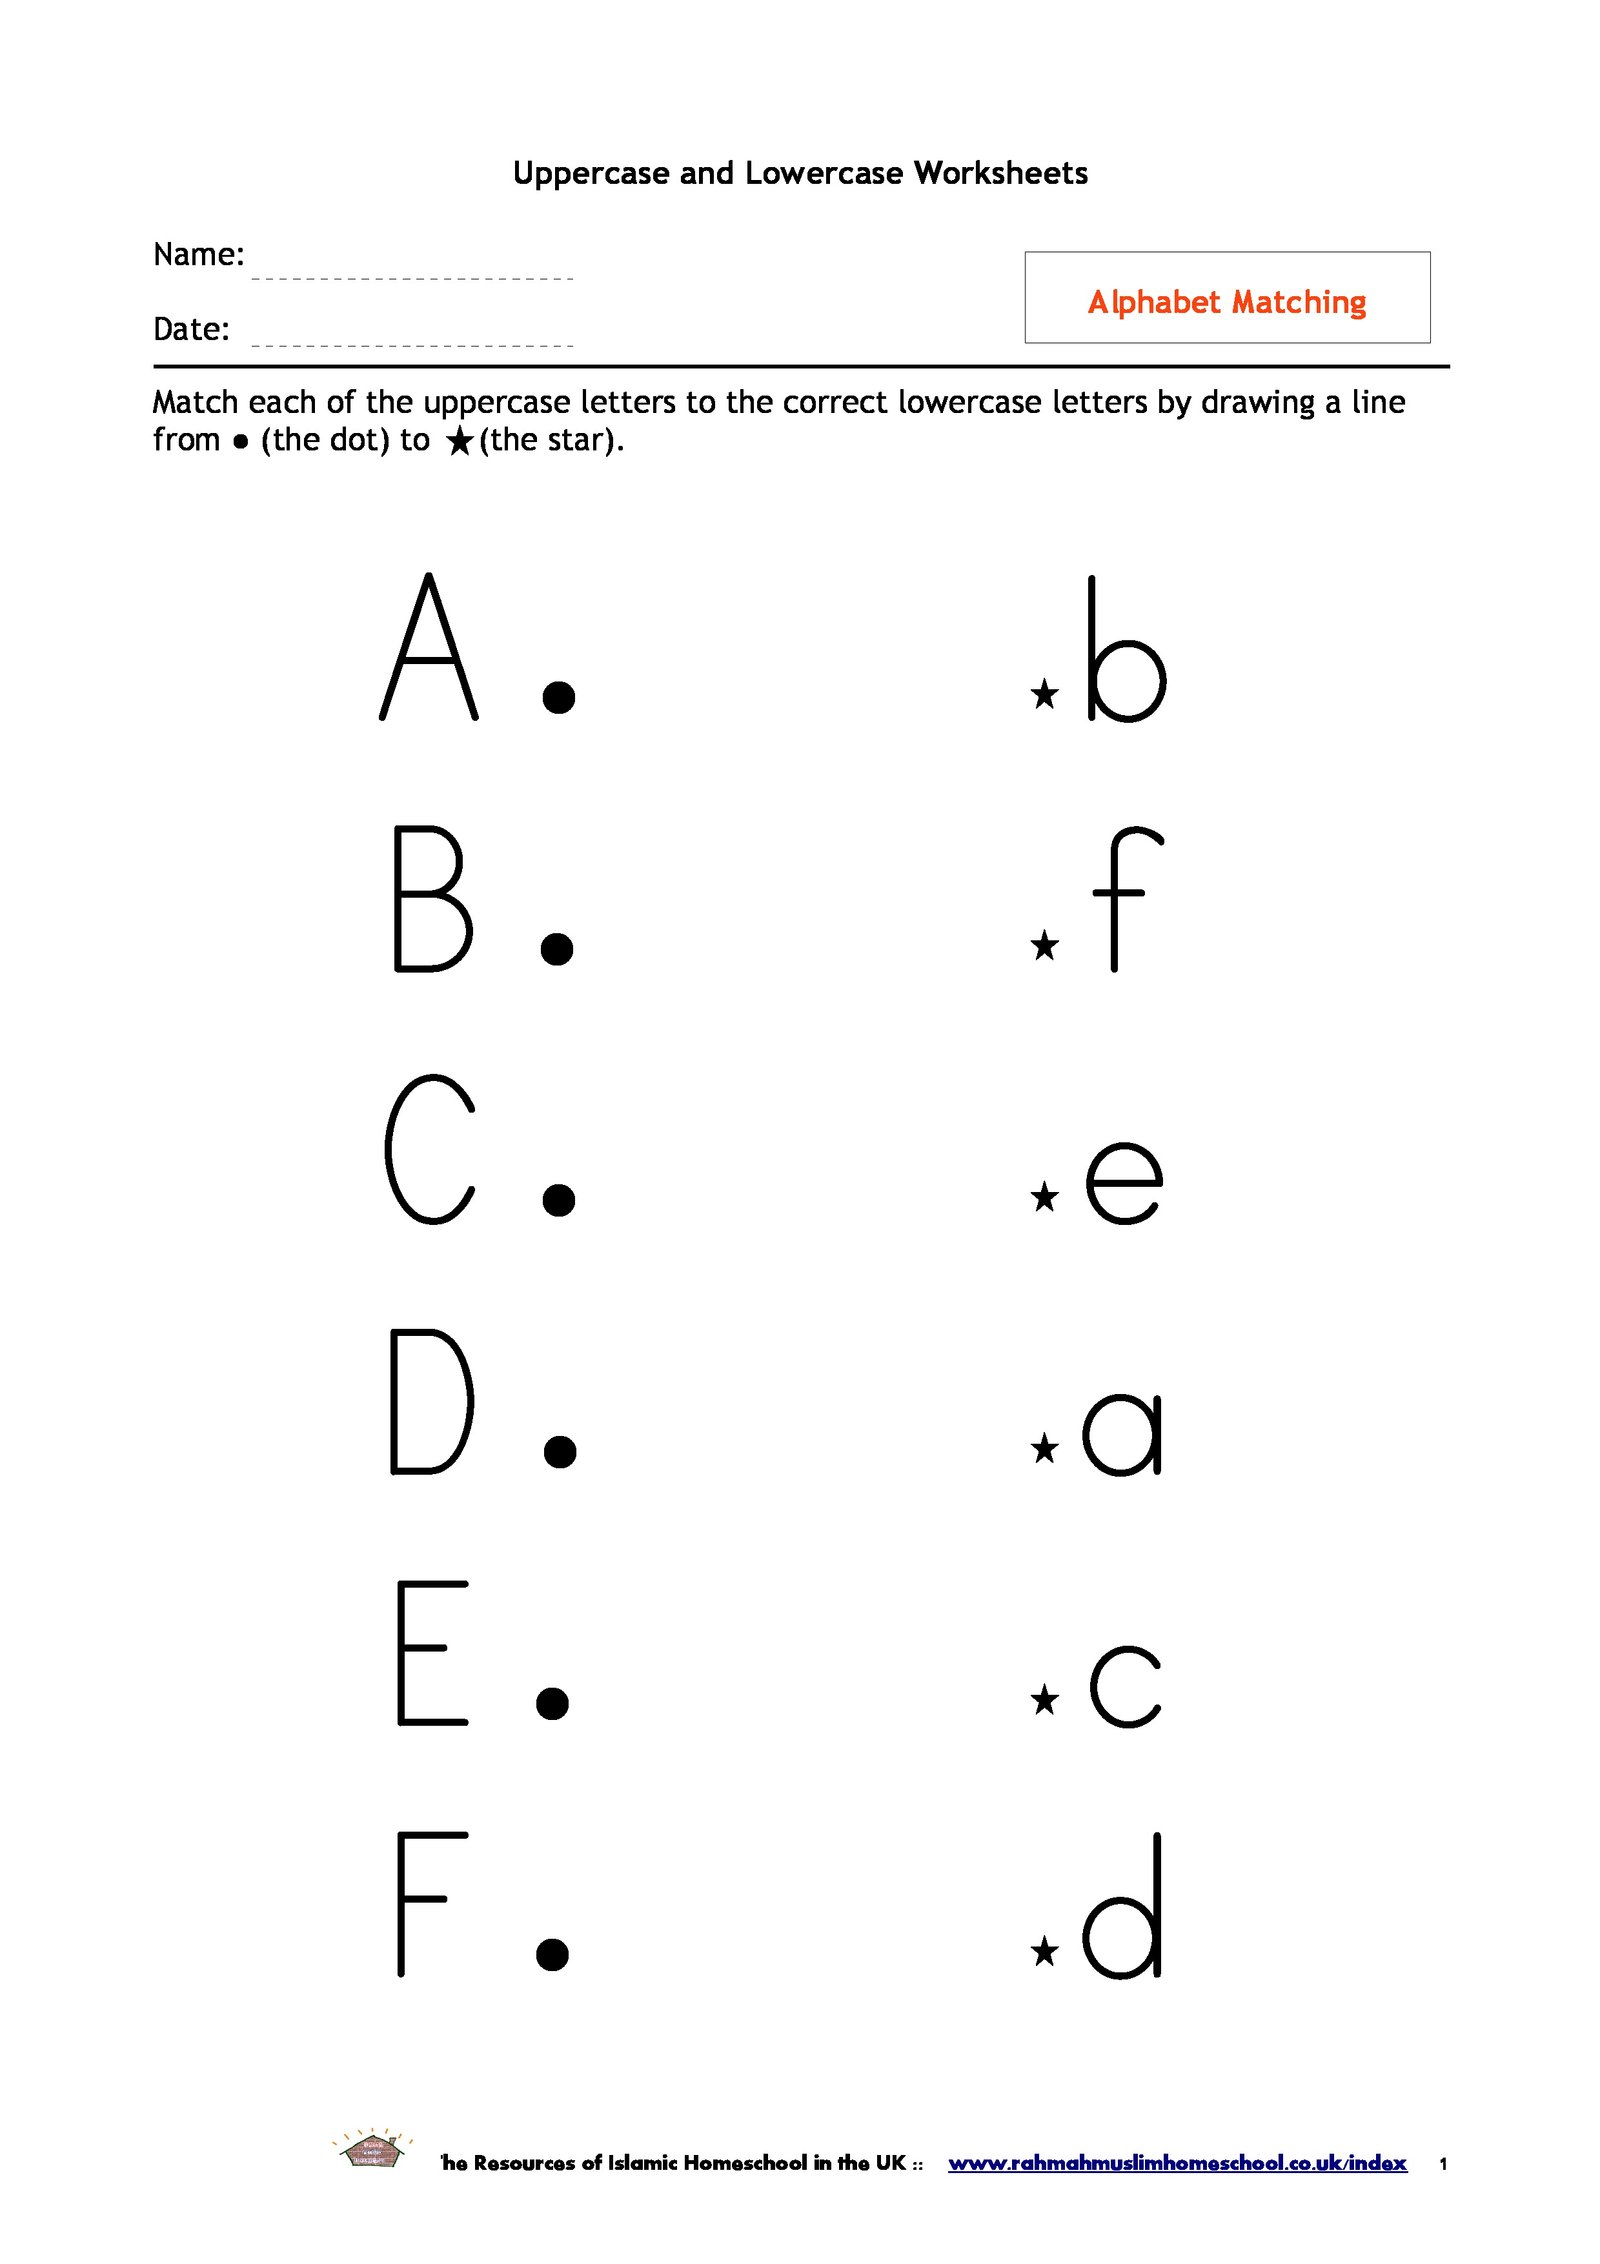 Alphabet Matching Worksheets | The Resources of Islamic ...